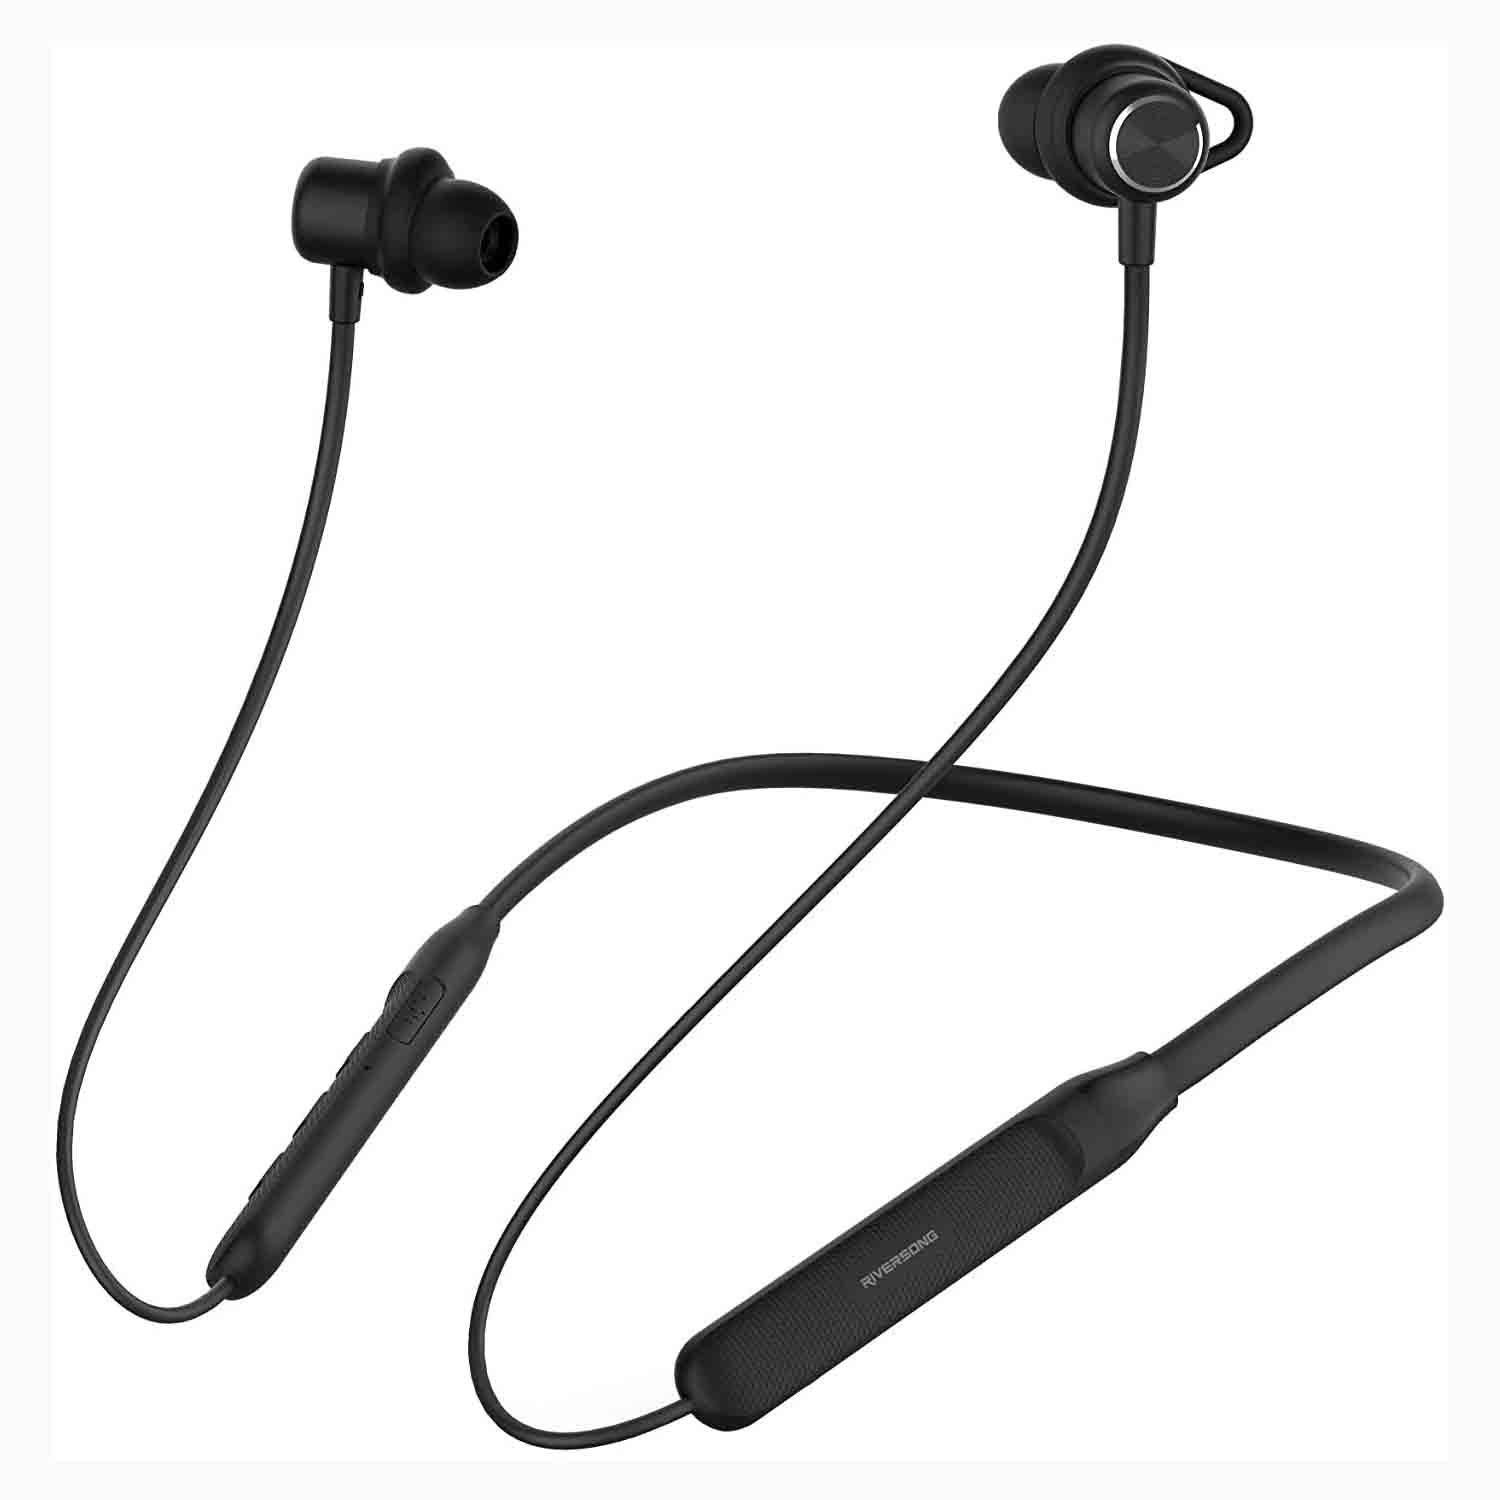 HEADSET BLUETOOTH BEHIND THE NECK RIVERSONG HIGH QUALITY STREAM W EA106 سماعه قوس ,Headphones & Mics